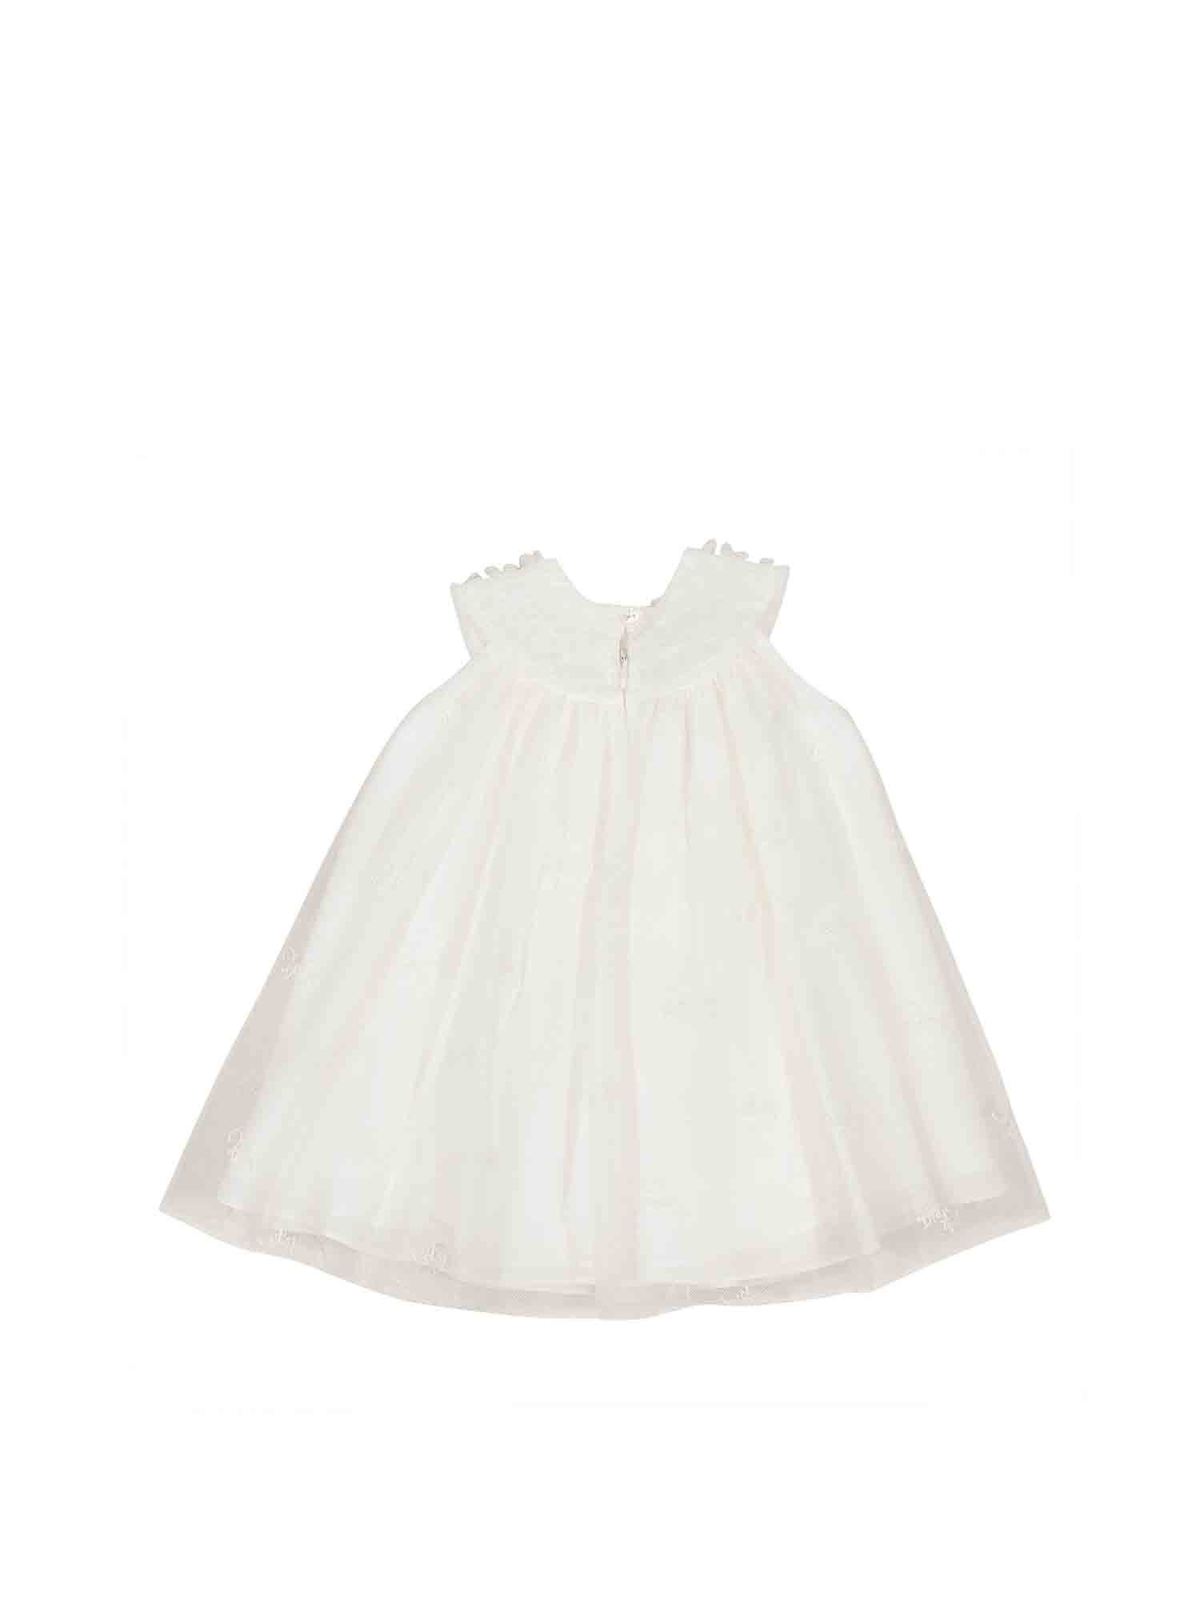 Baby Flared Dress Ivory and Pale Pink Dior Oblique PearlEmbroidered Tulle   DIOR US